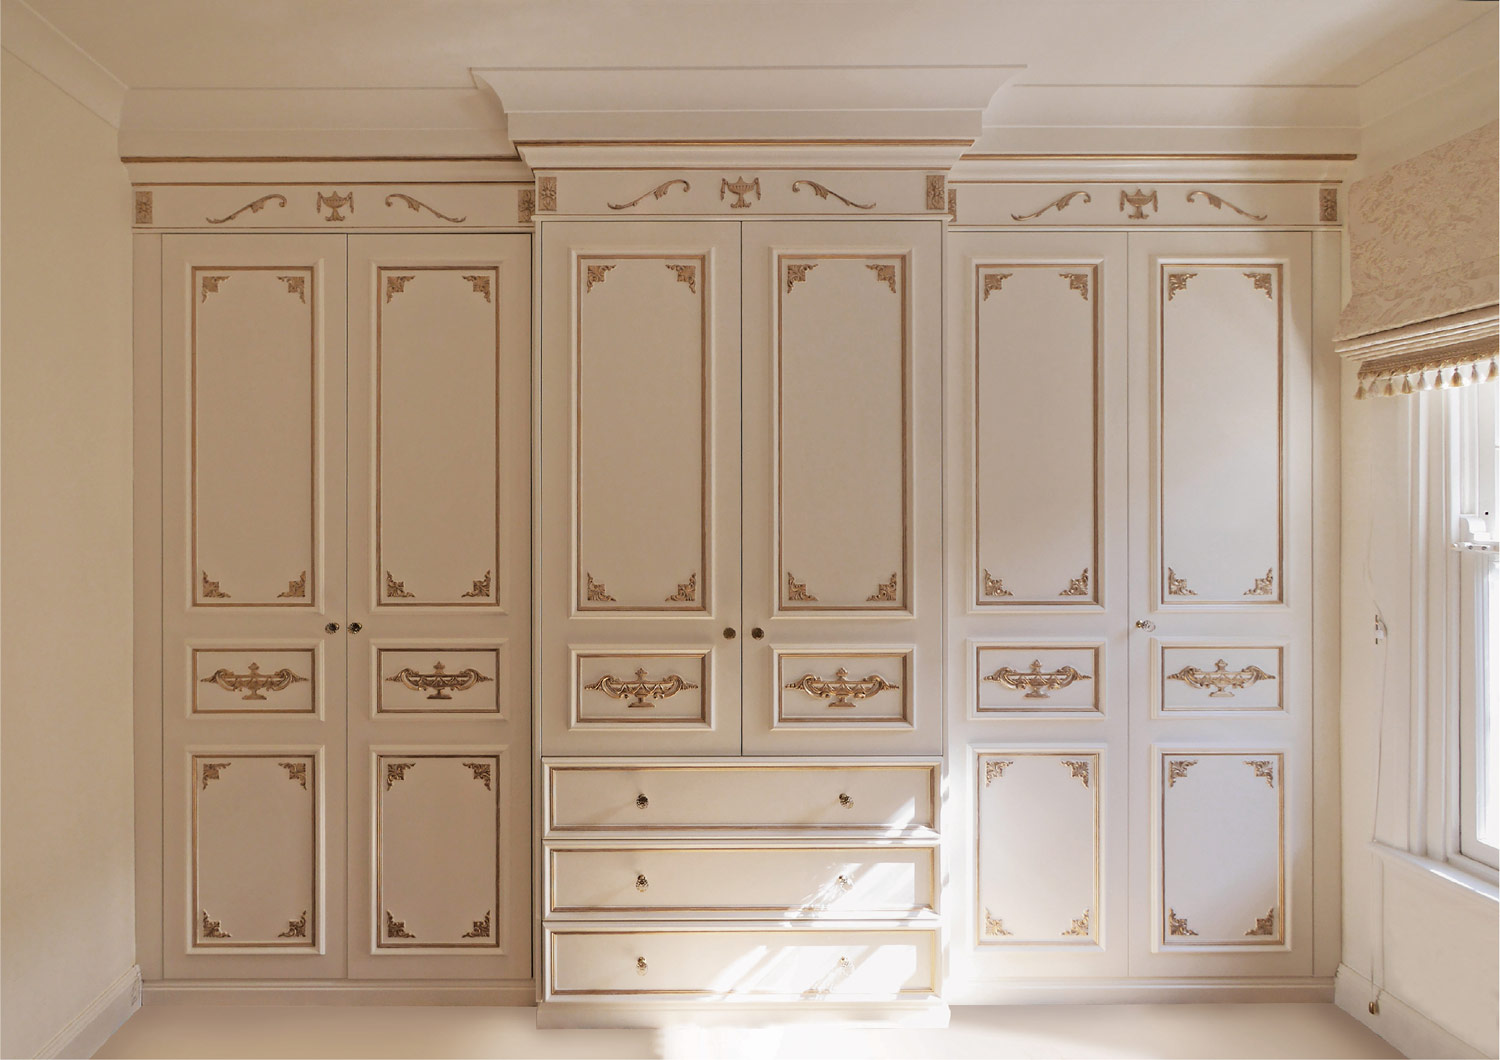 1-French-style-wardrobe-in-white-with-gold-trim-and-ornamentation-